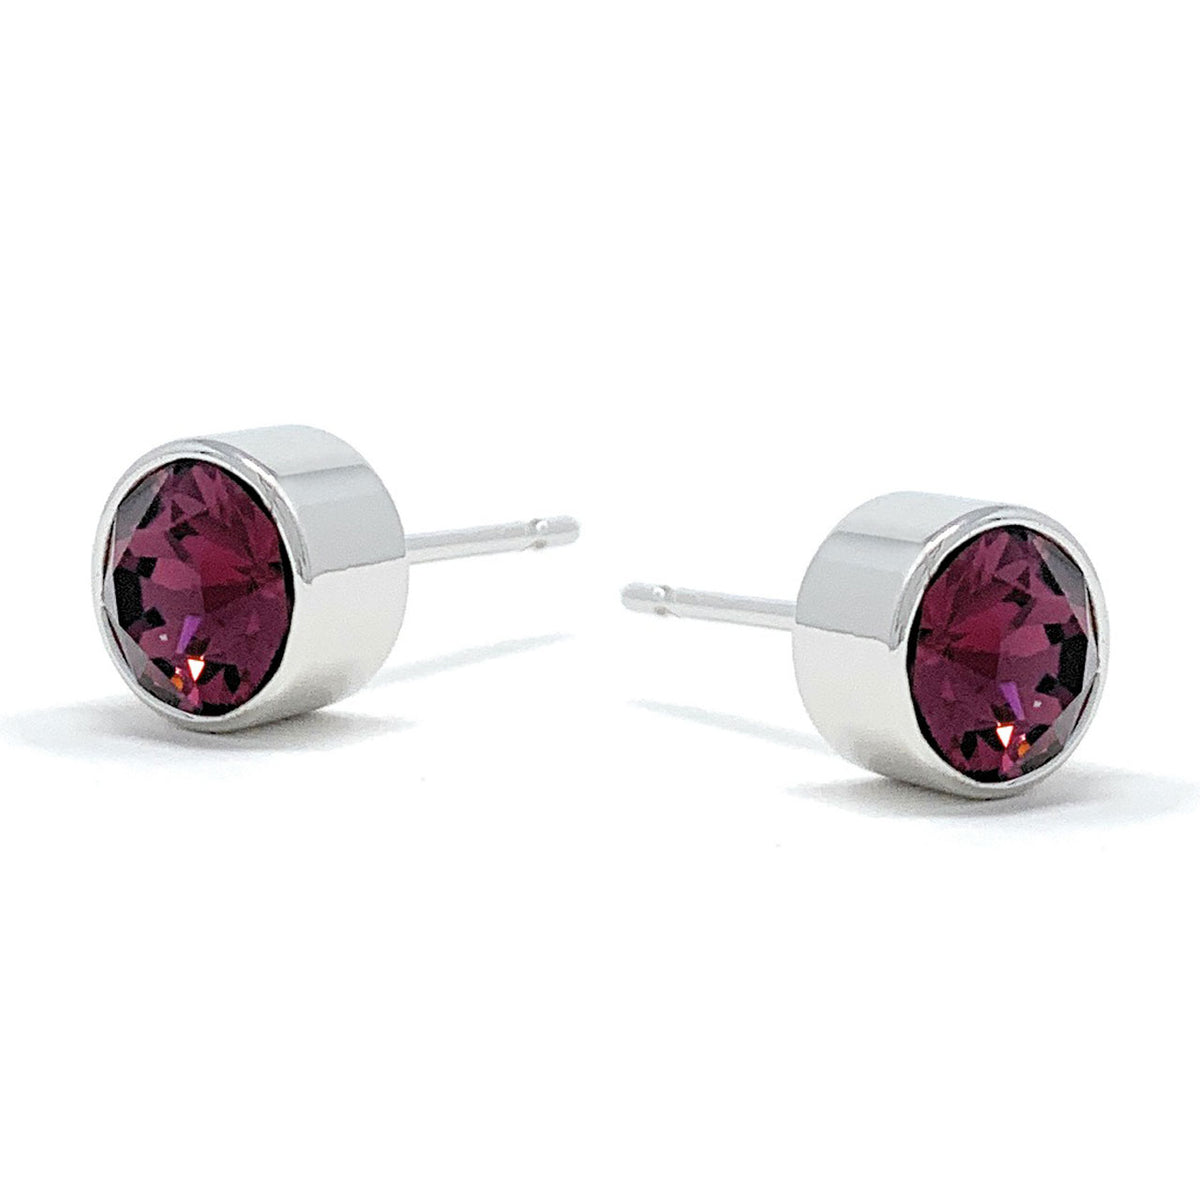 Harley Small Stud Earrings with Purple Amethyst Round Crystals from Swarovski Silver Toned Rhodium Plated - Ed Heart